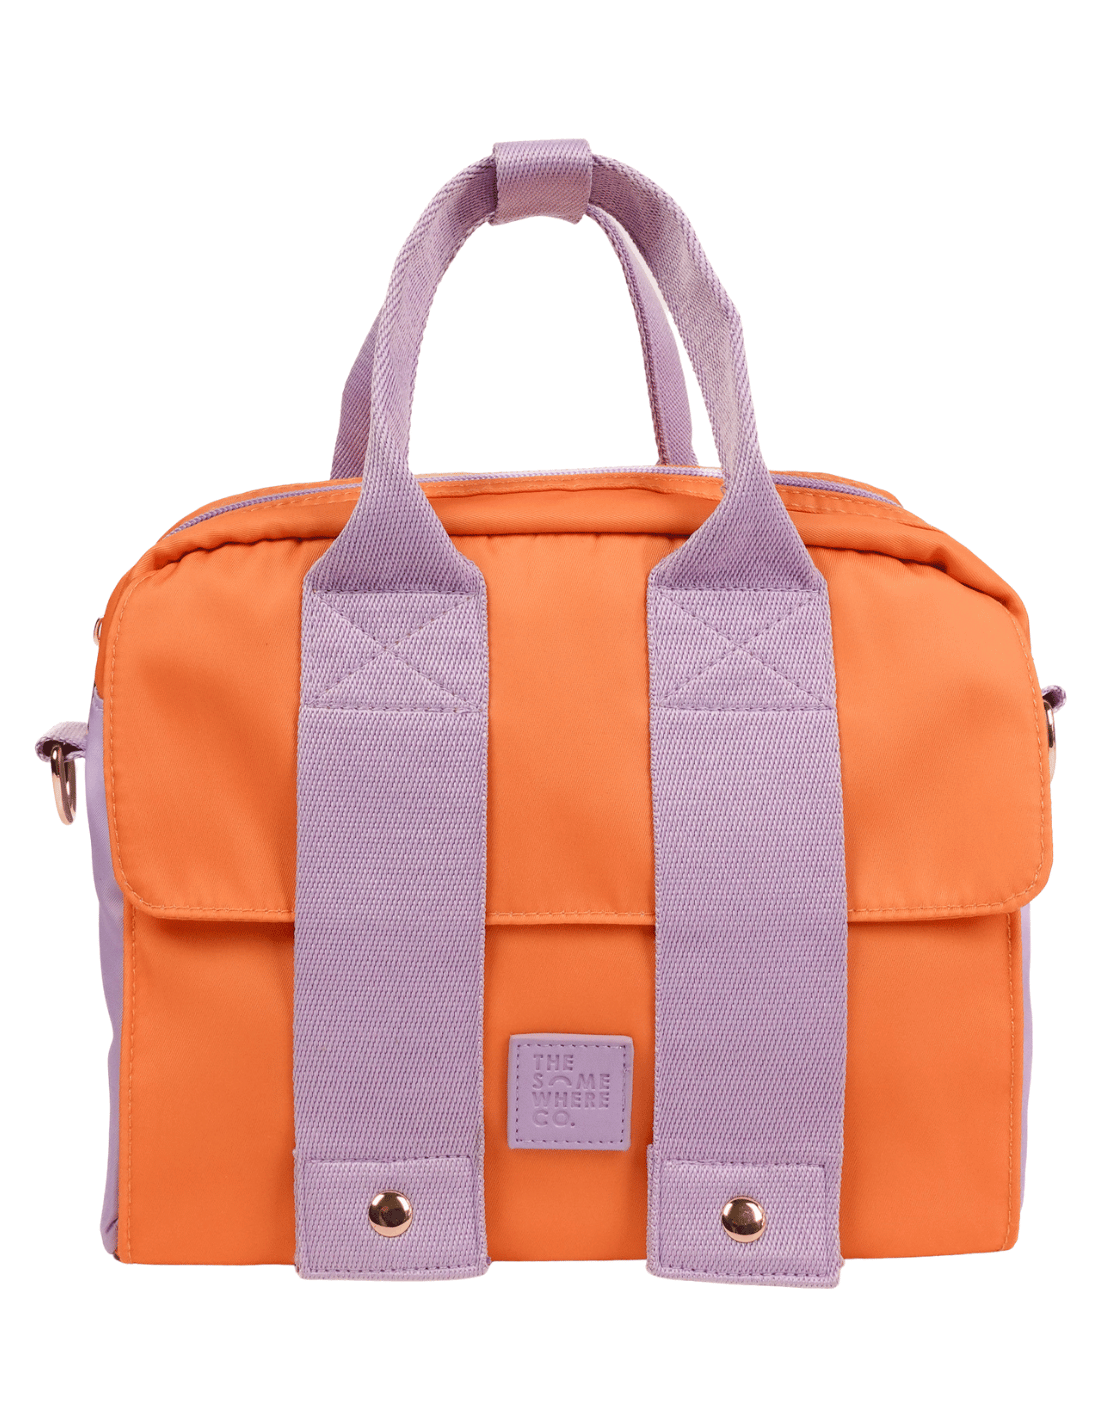 Lady Marmalade Lunch Tote